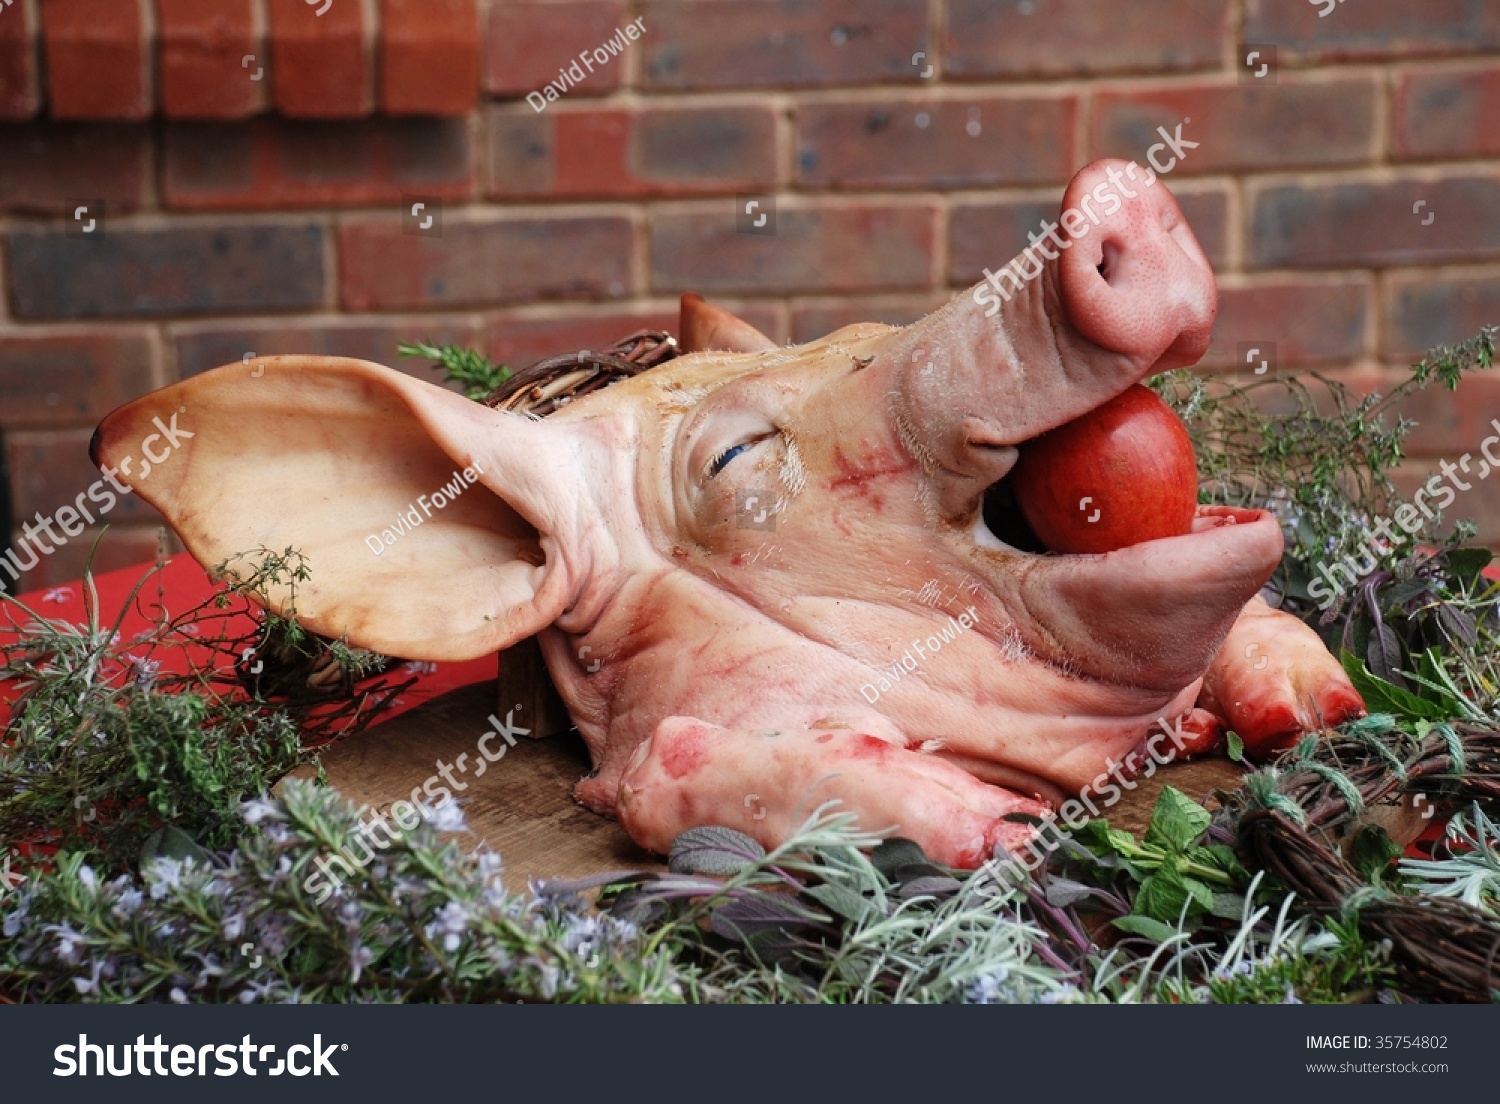 stock-photo-a-pigs-head-with-an-apple-in-its-mouth-at-a-medieval-style-banquet-35754802.jpg